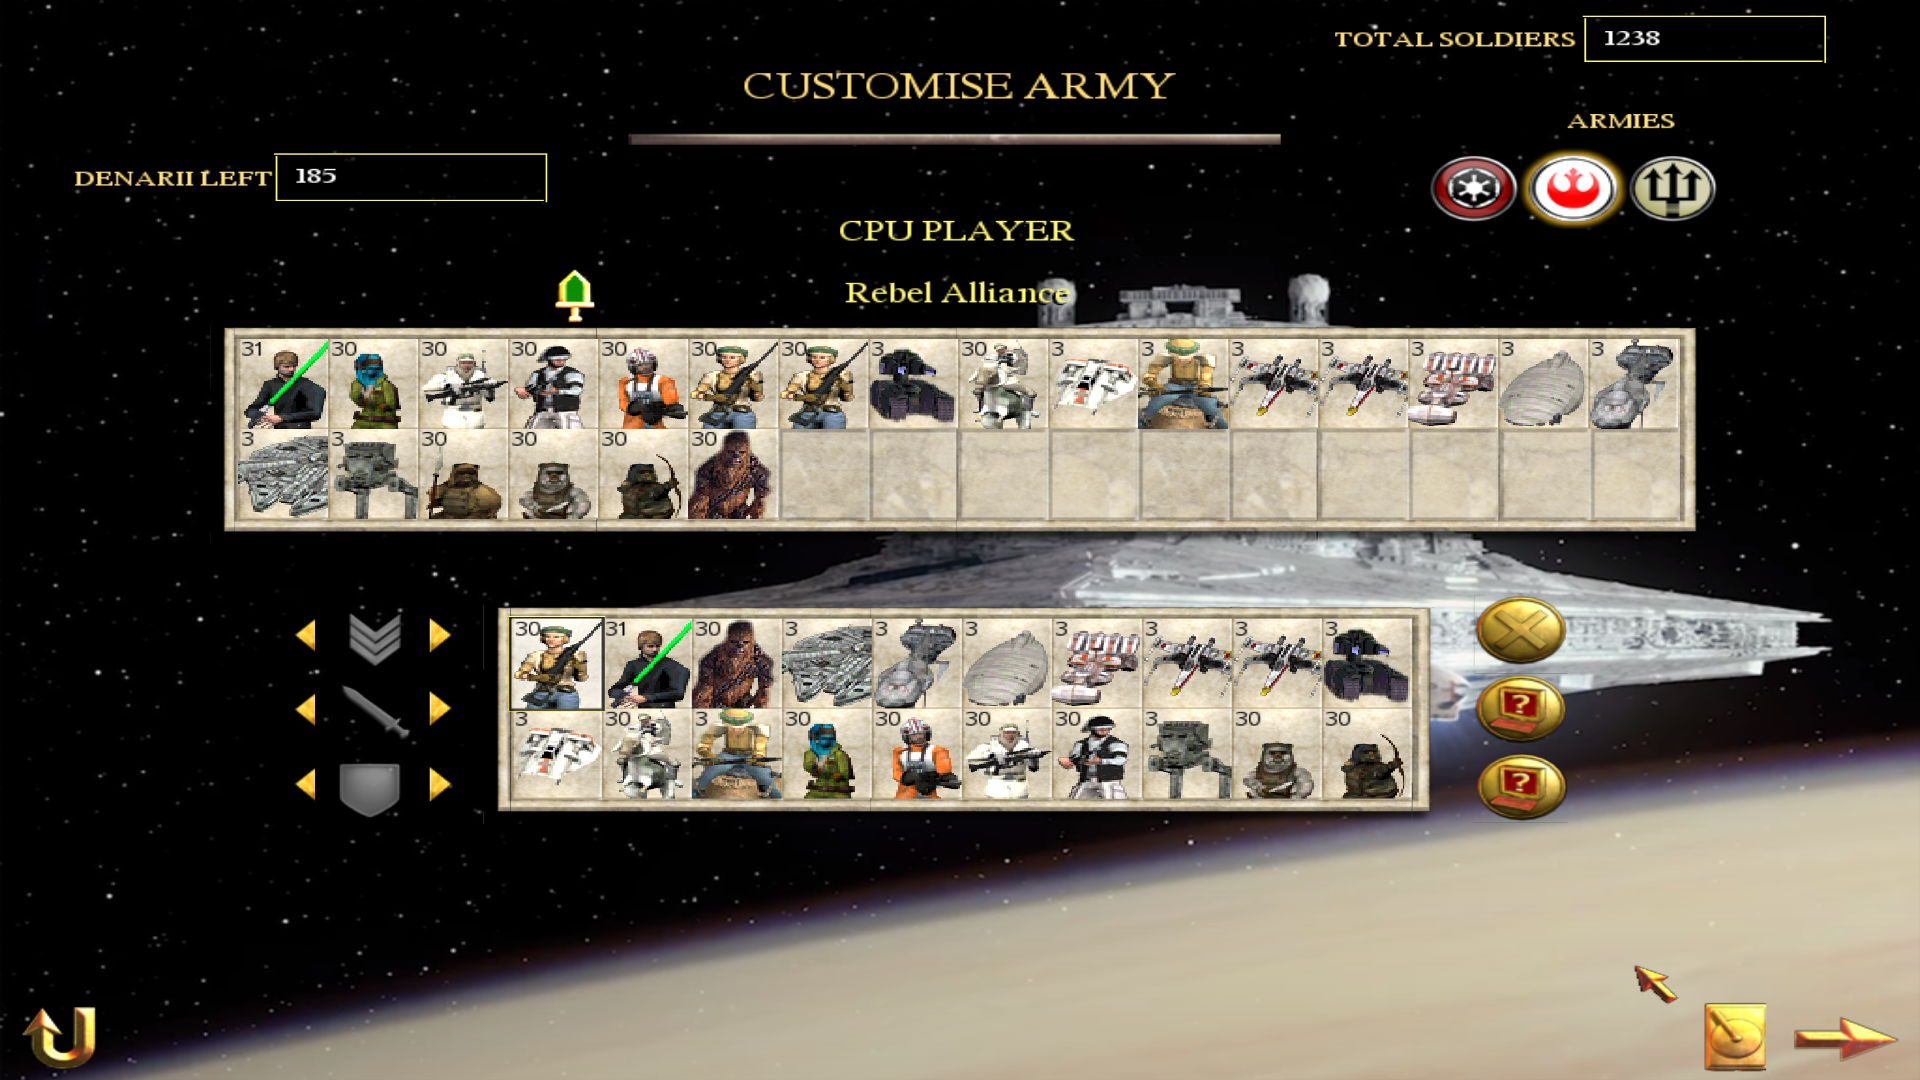 The Rebel Alliance have a few new units available!